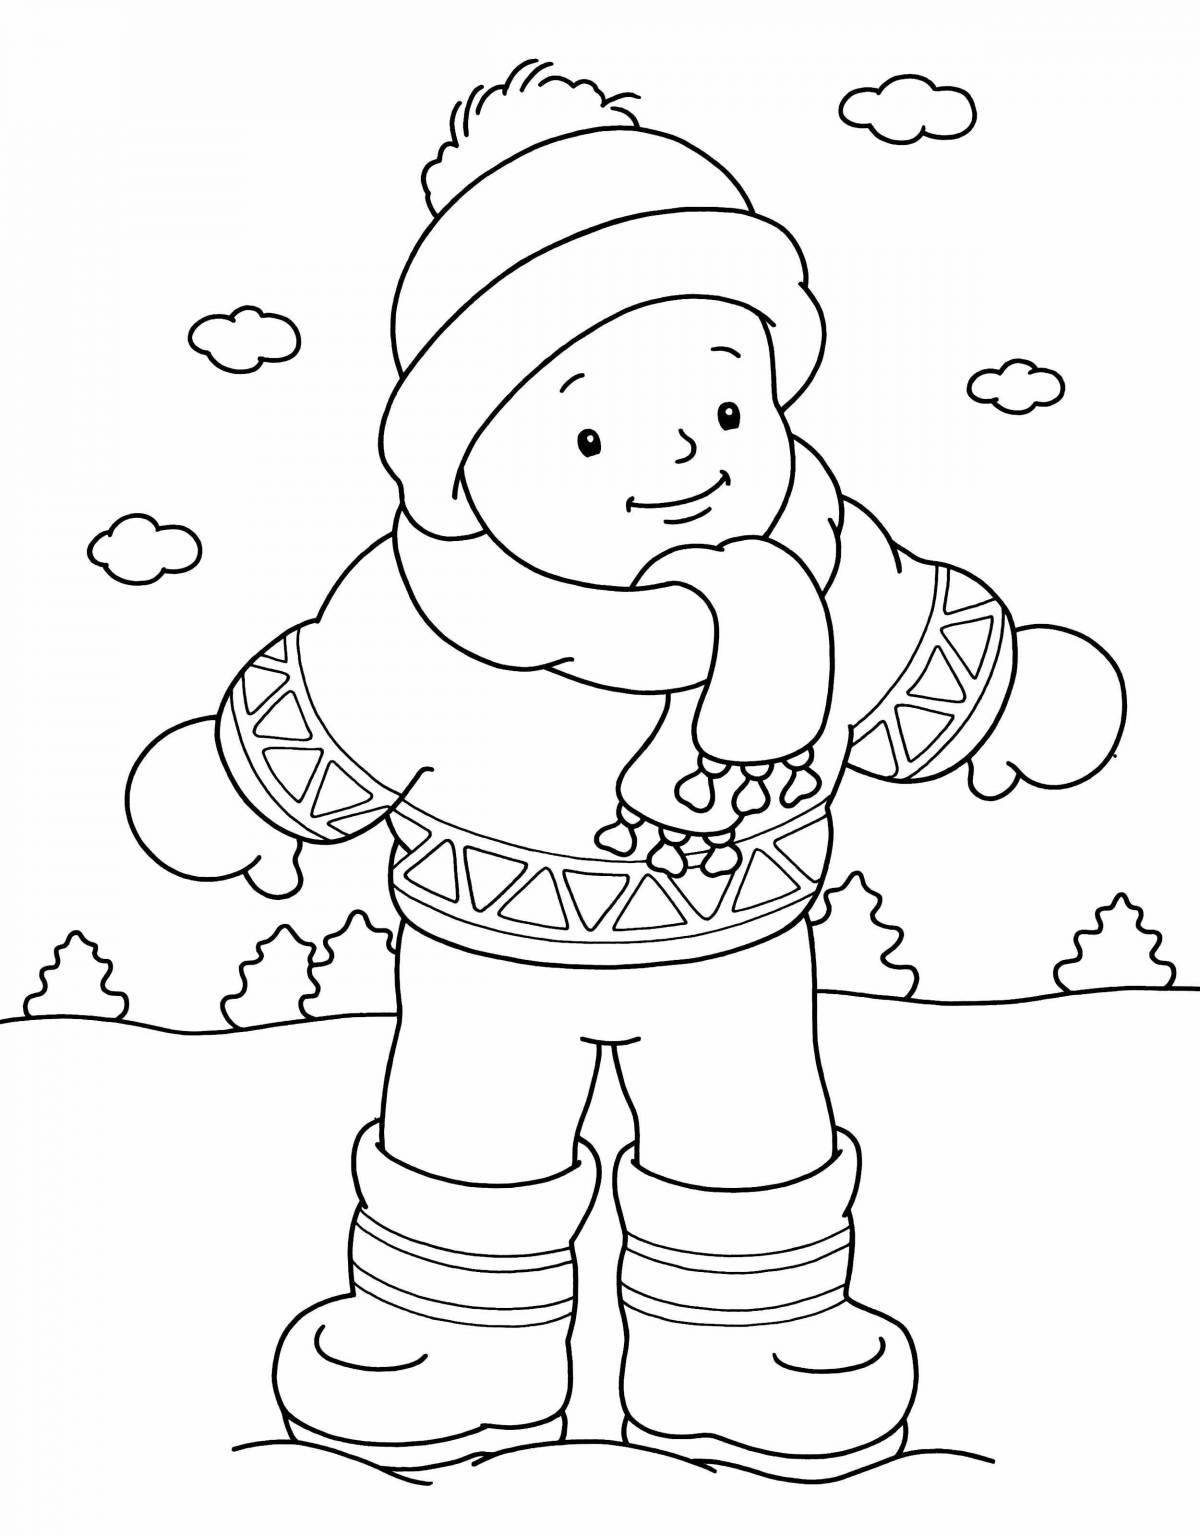 Fun coloring page for winter clothes for 3-4 year olds